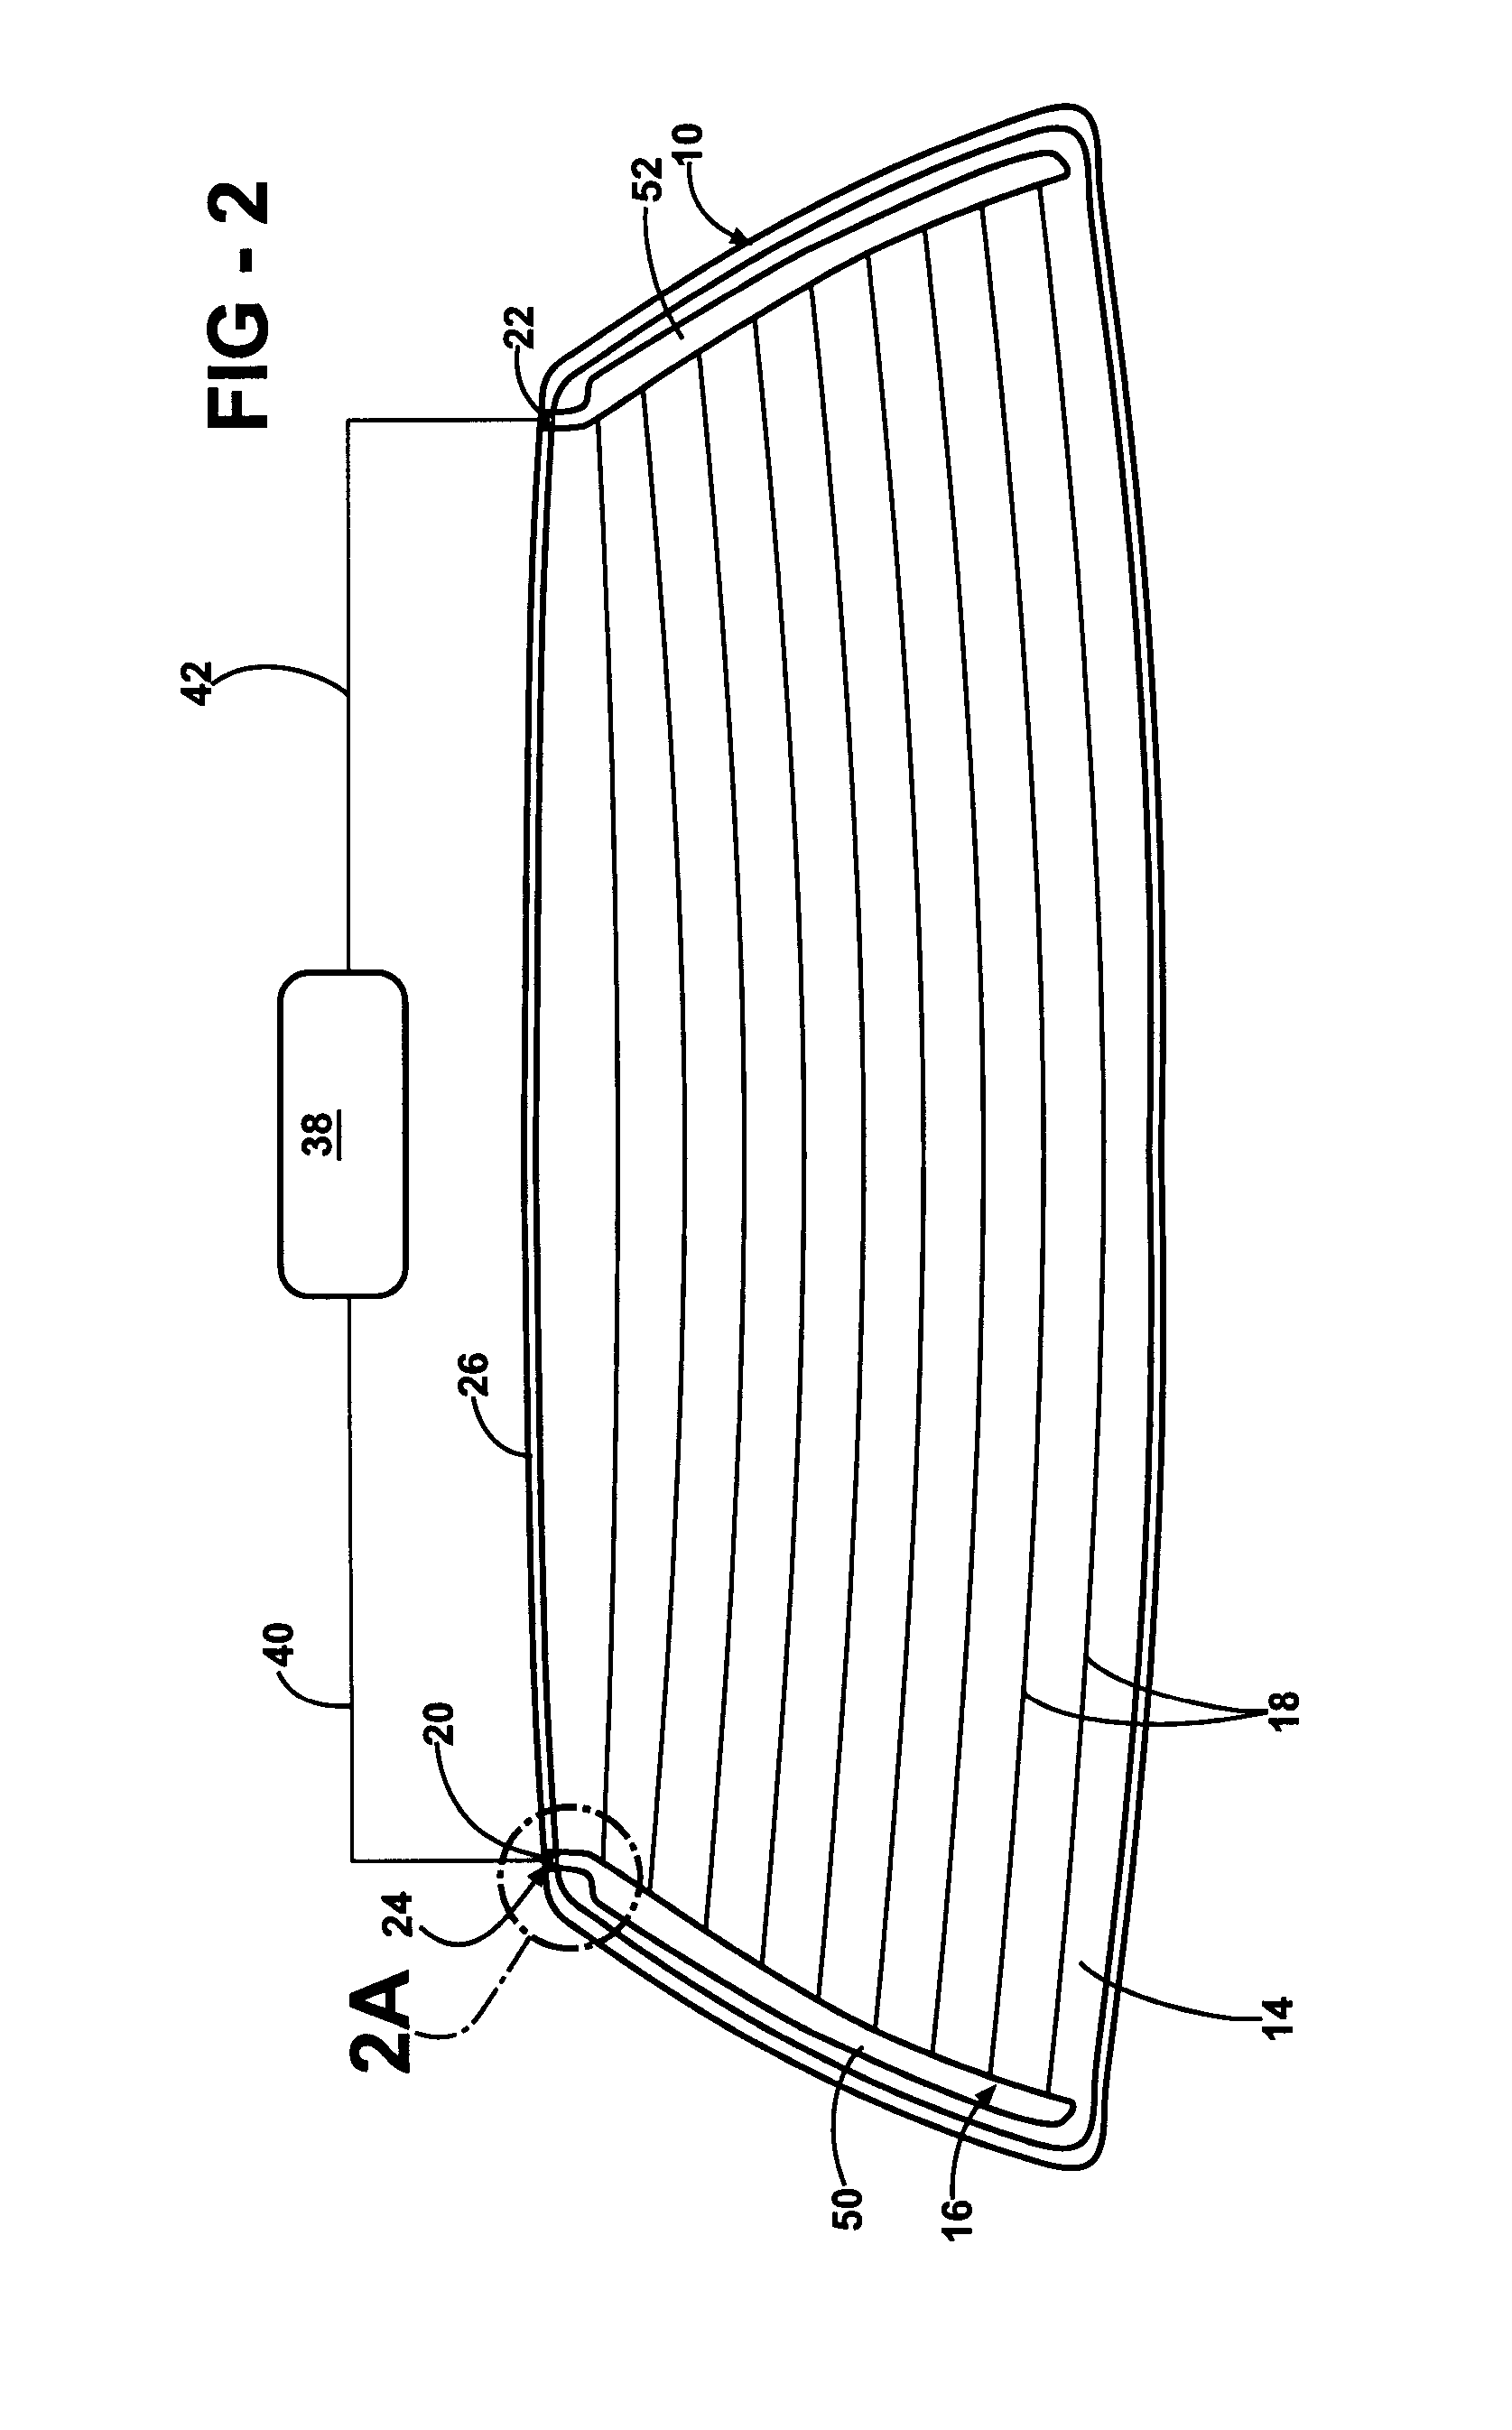 Electrical Connector For A Window Pane Of A Vehicle